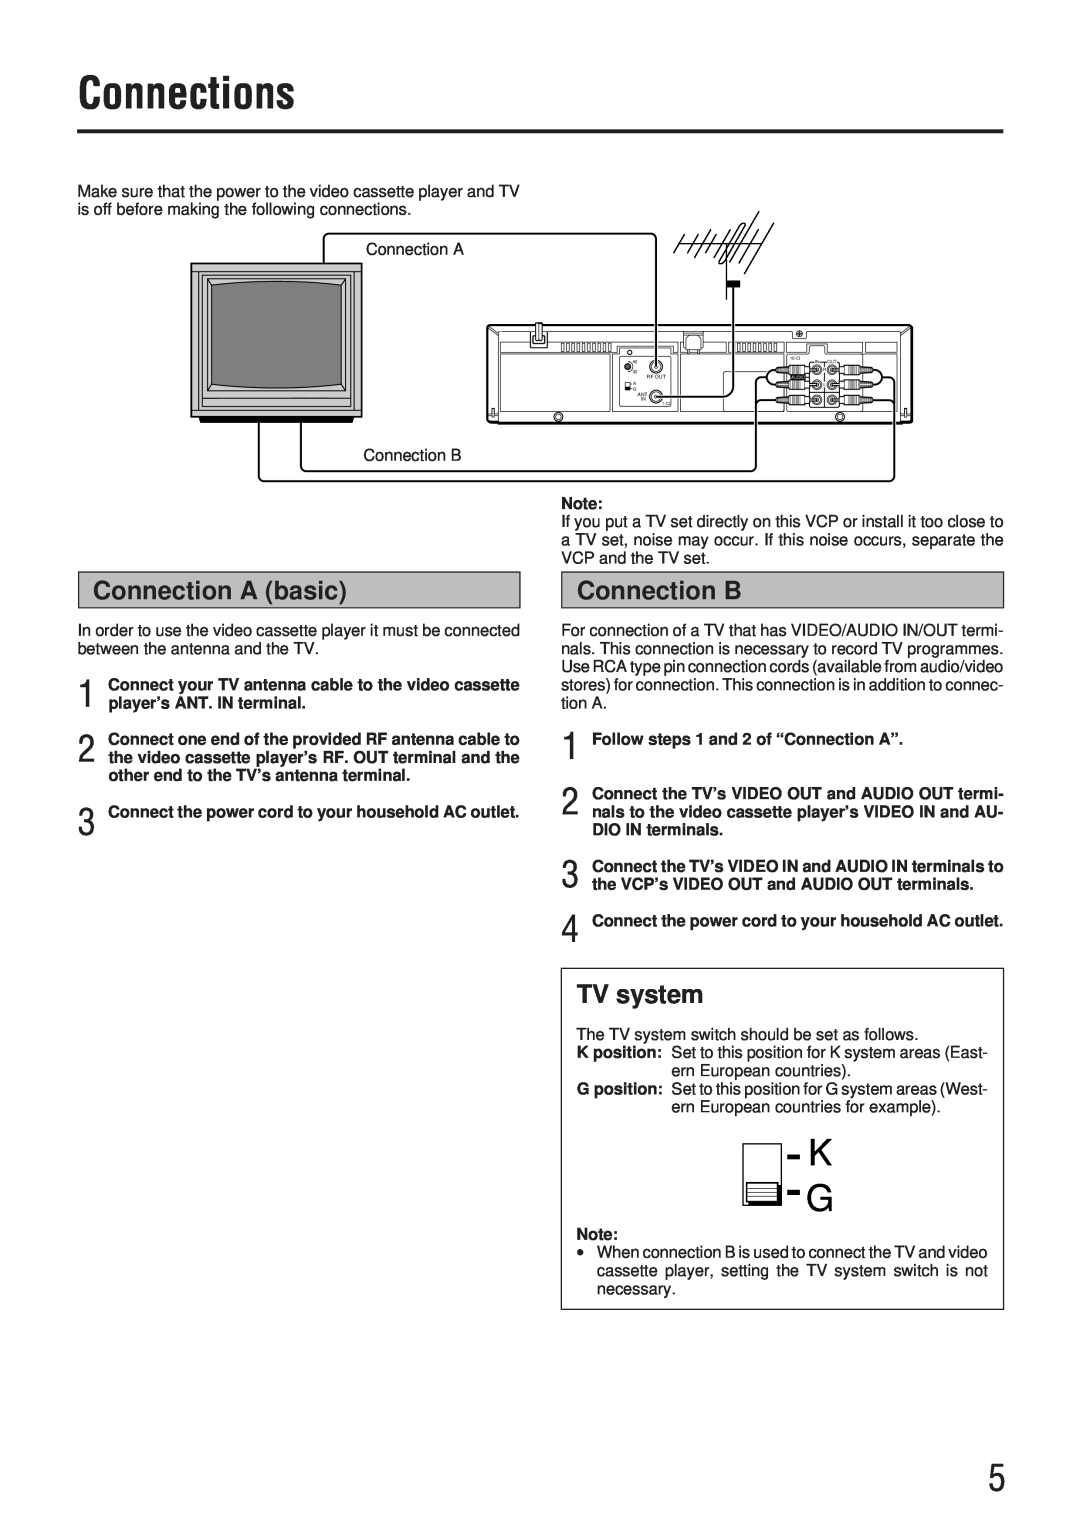 JVC HR-P82A manual Connections, Connection A basic, Connection B, TV system 